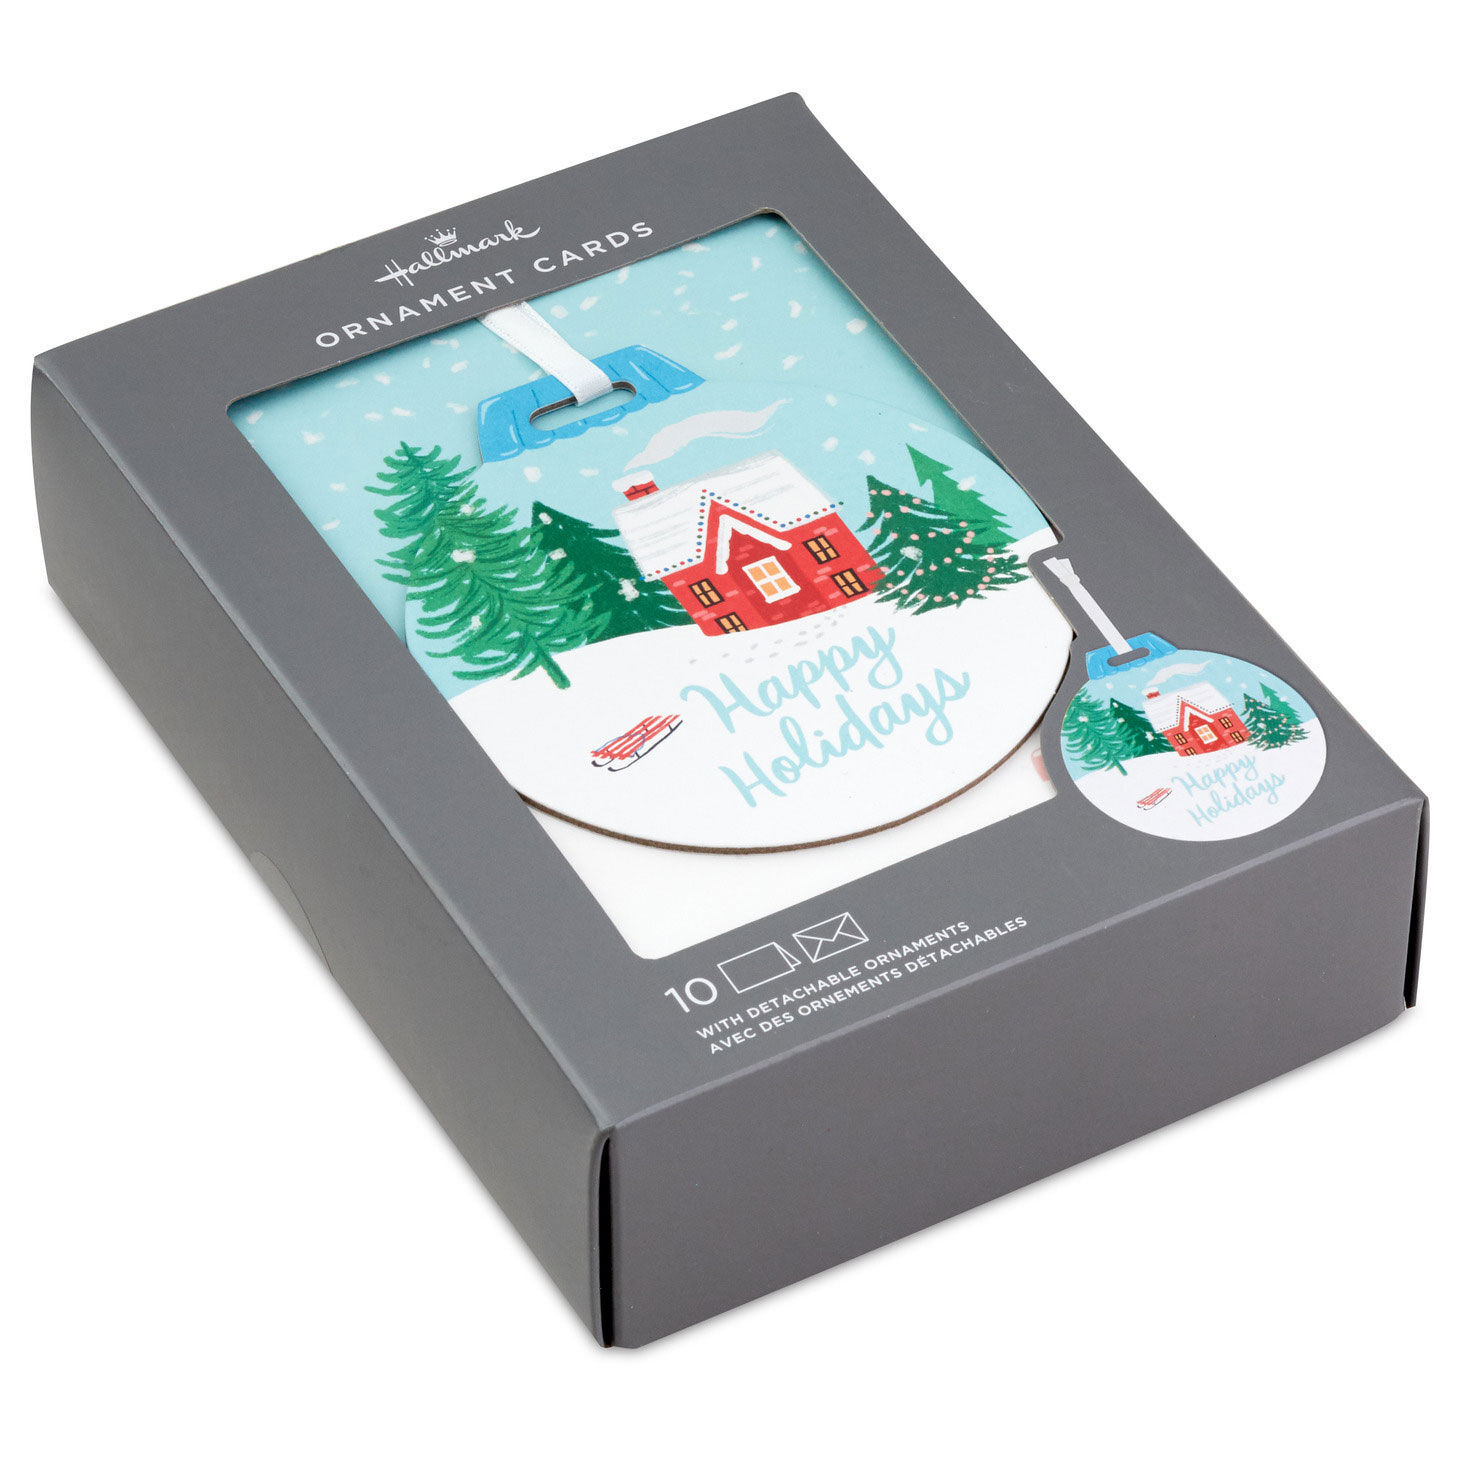 https://www.hallmark.com/dw/image/v2/AALB_PRD/on/demandware.static/-/Sites-hallmark-master/default/dw8efb529f/images/finished-goods/products/1XPX1330/Heartfelt-Home-Boxed-Christmas-Cards-With-Ornament_1XPX1330_01.jpg?sfrm=jpg